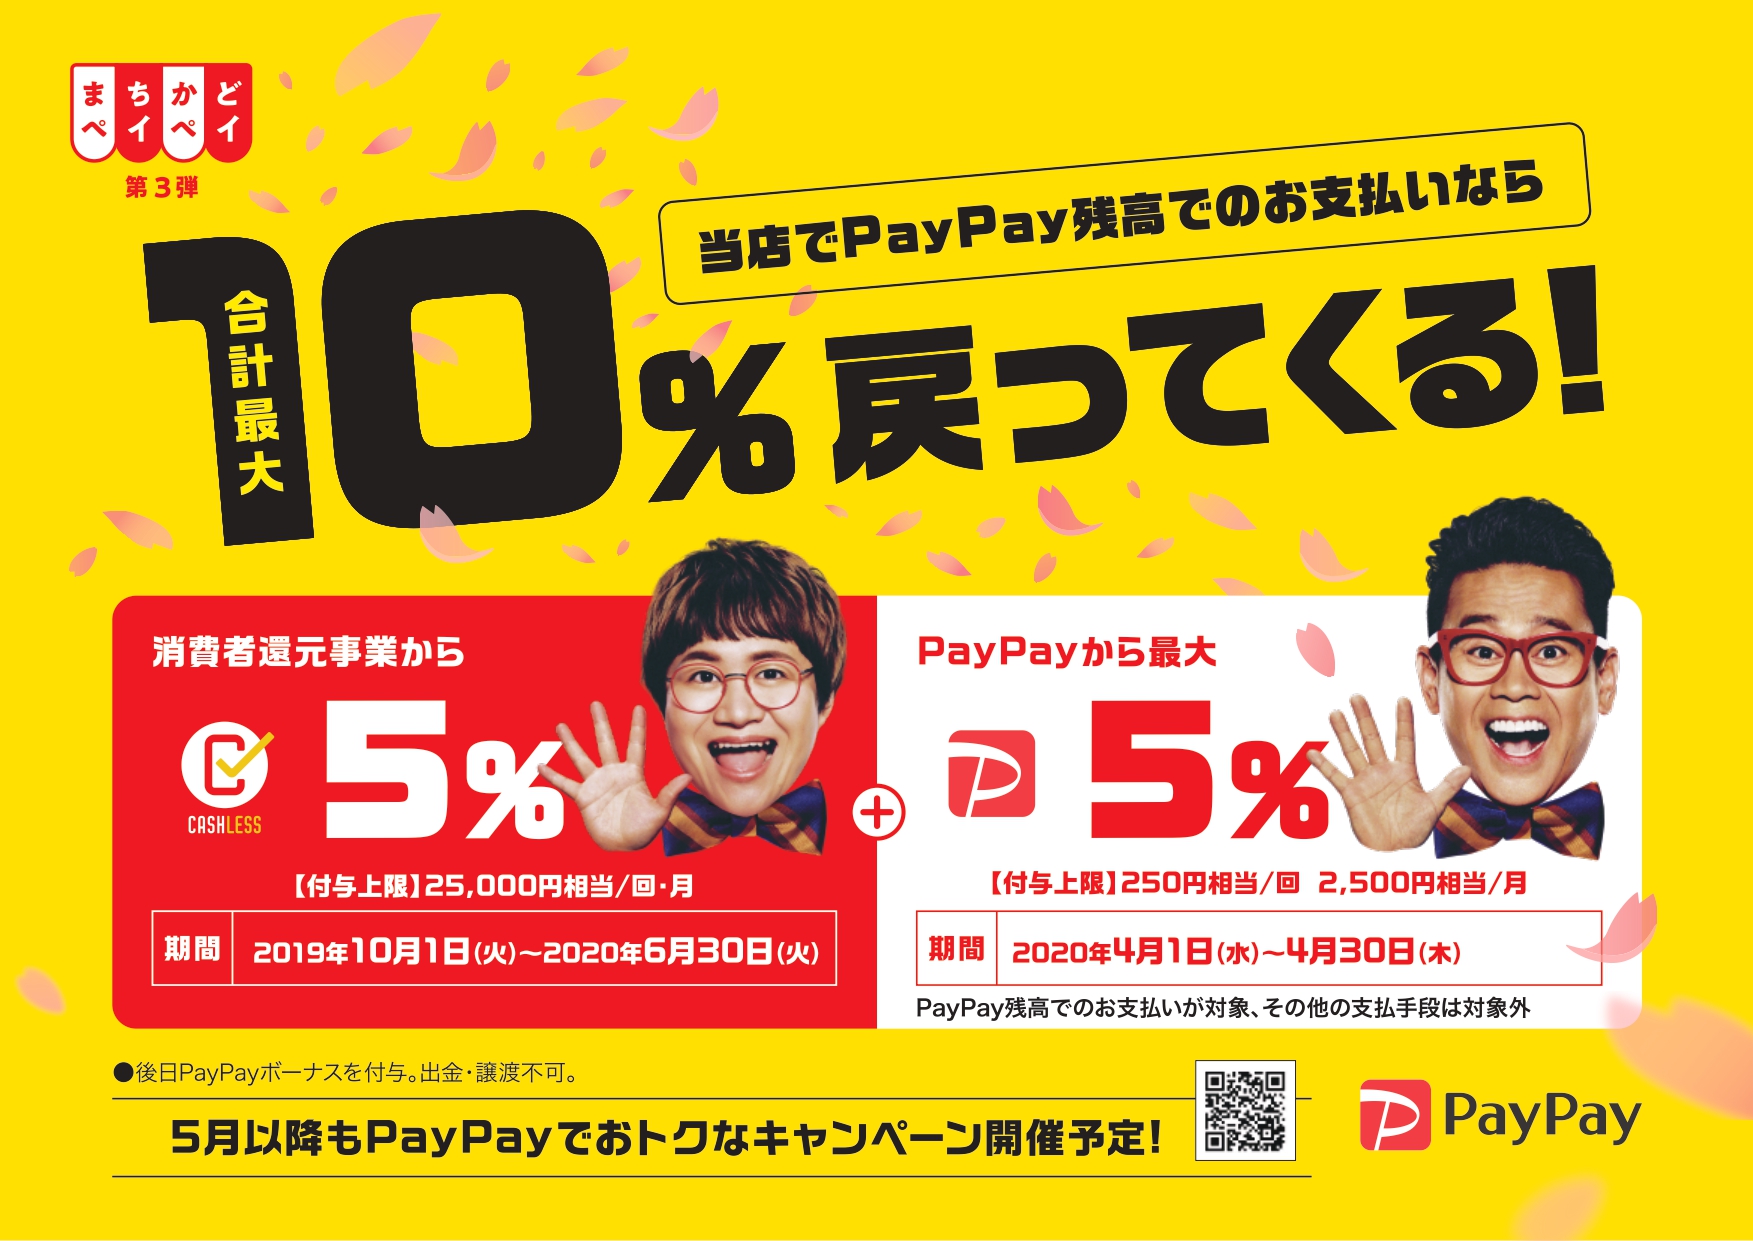 PayPay_machikado_3rd_poster_A4_w_talent_page-0001.jpg